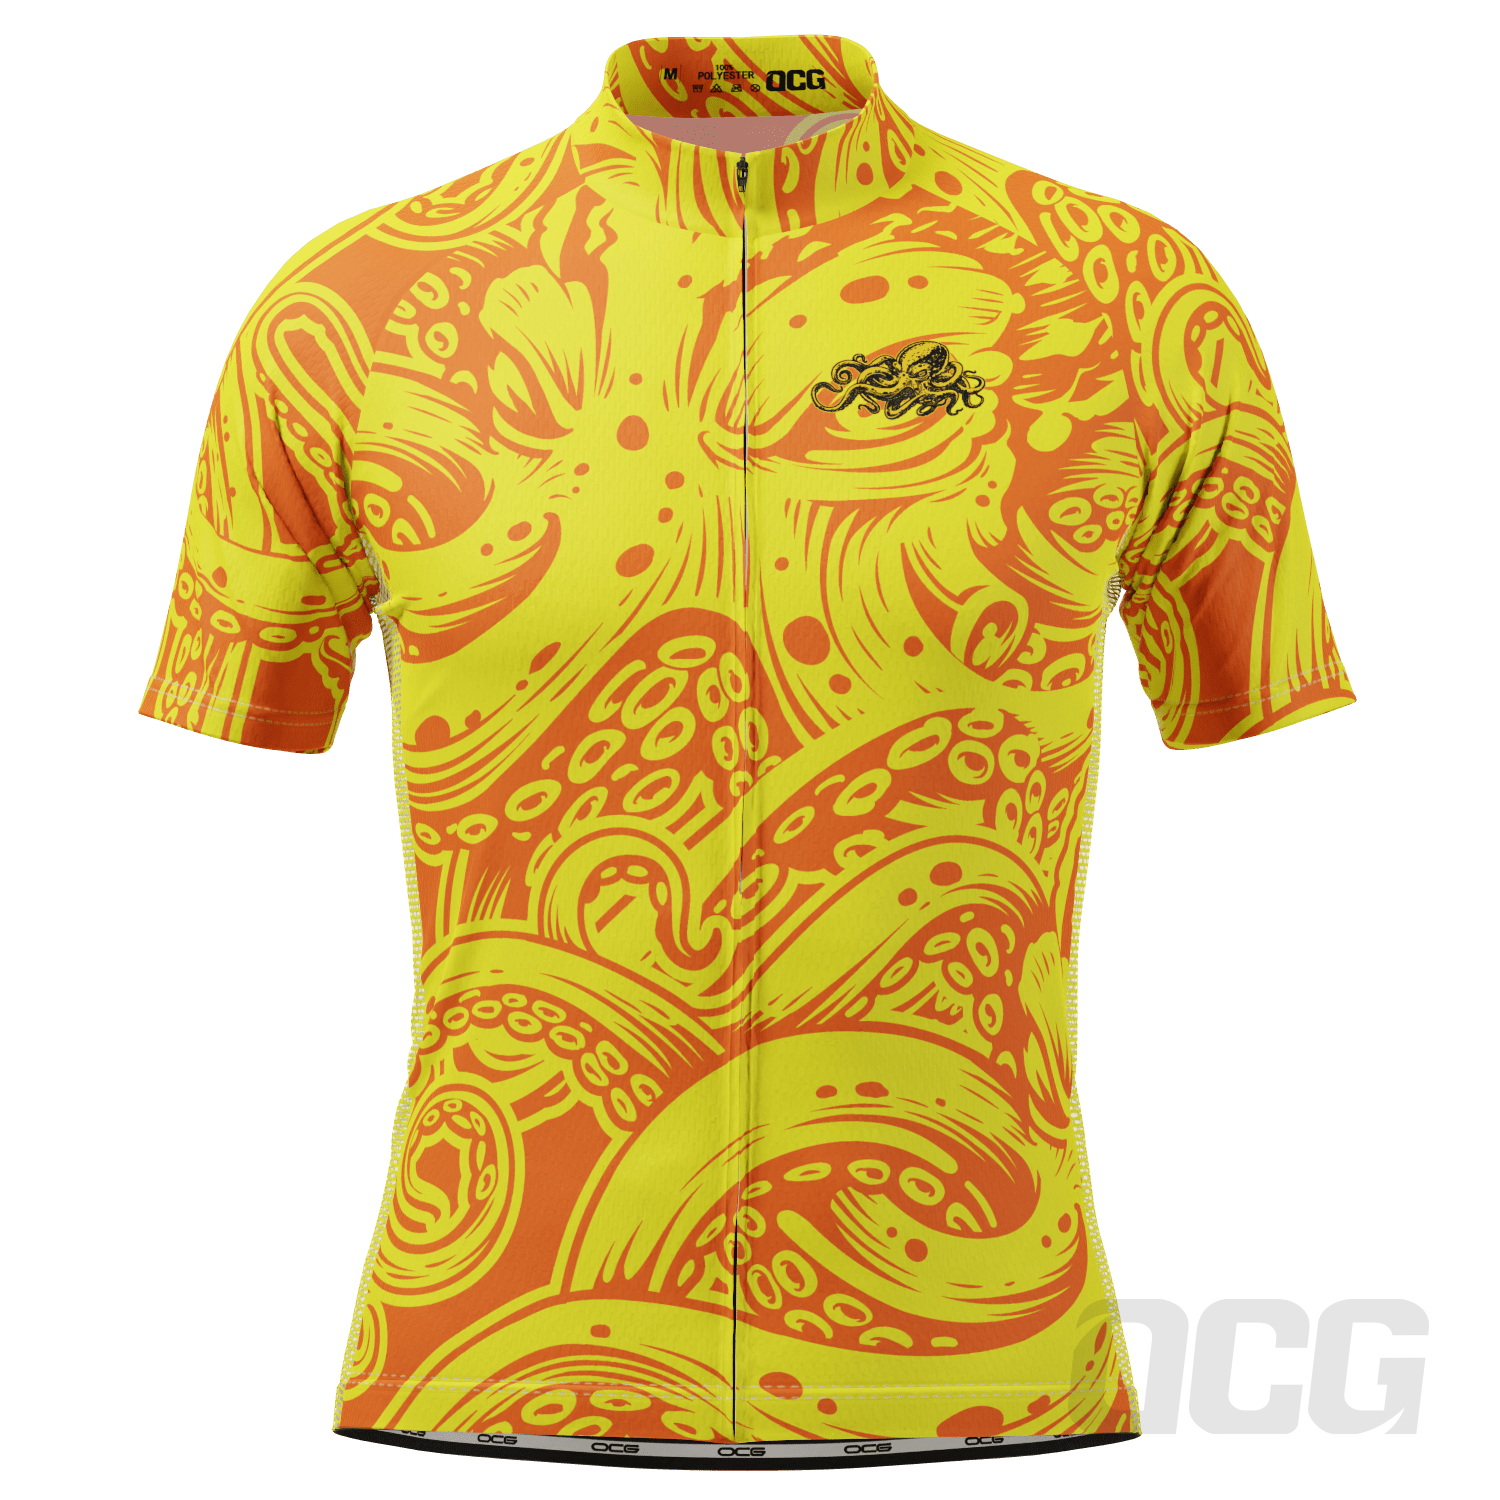 Men's The Black Octopus Short Sleeve Cycling Jersey